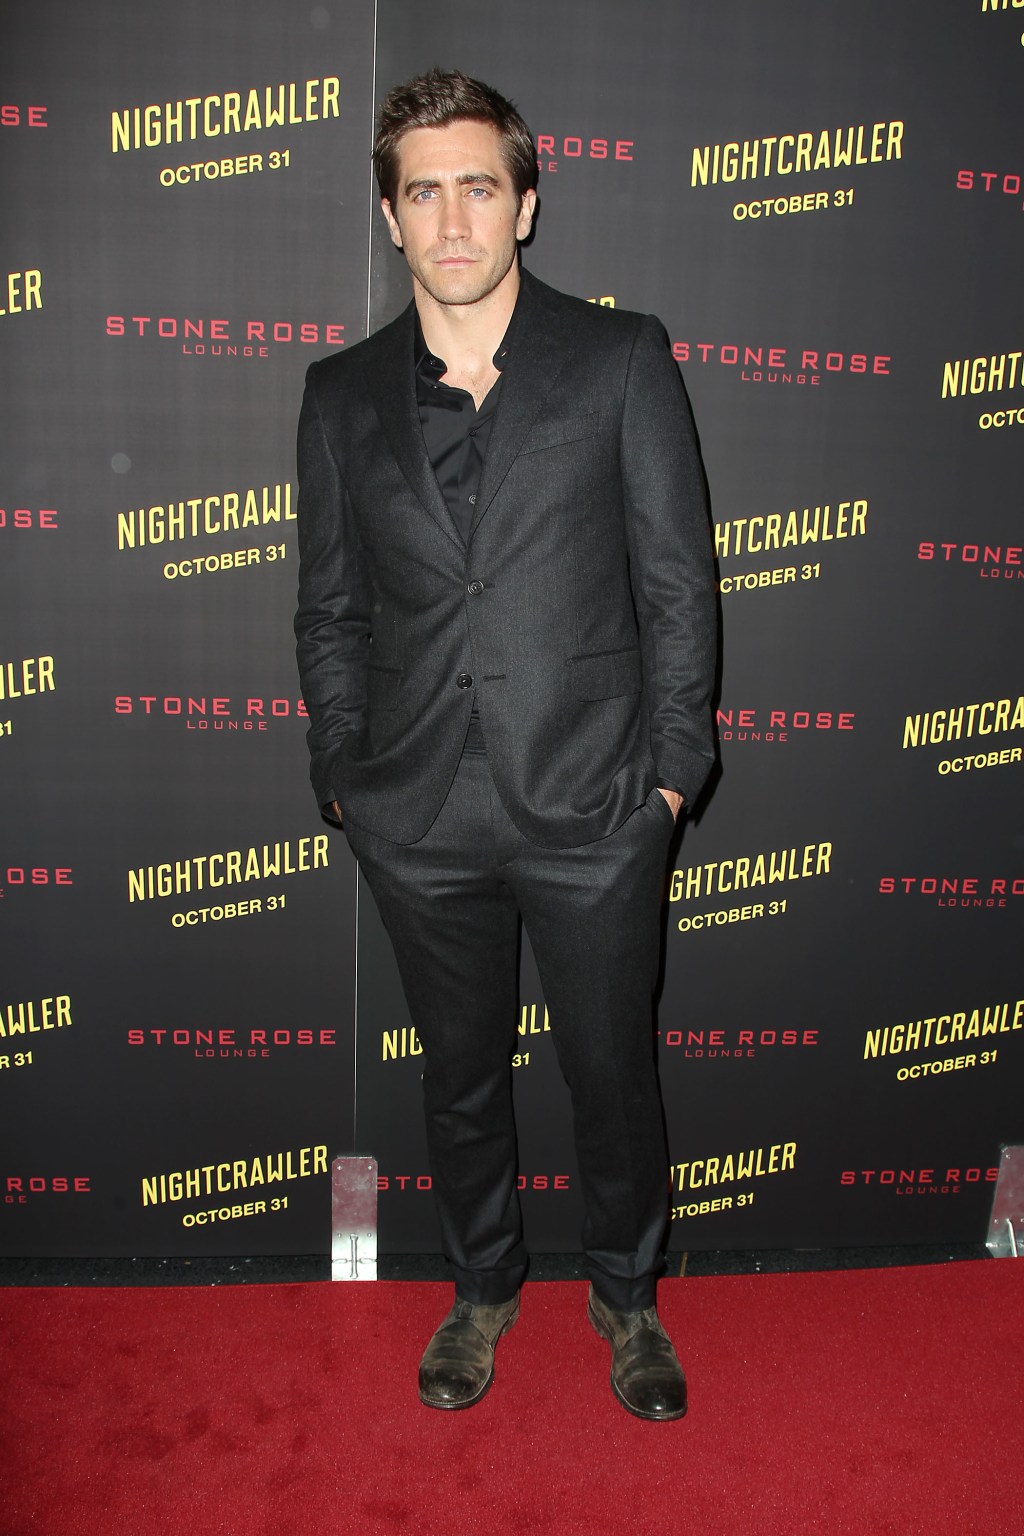 Jake Gyllenhaal at the premiere of 